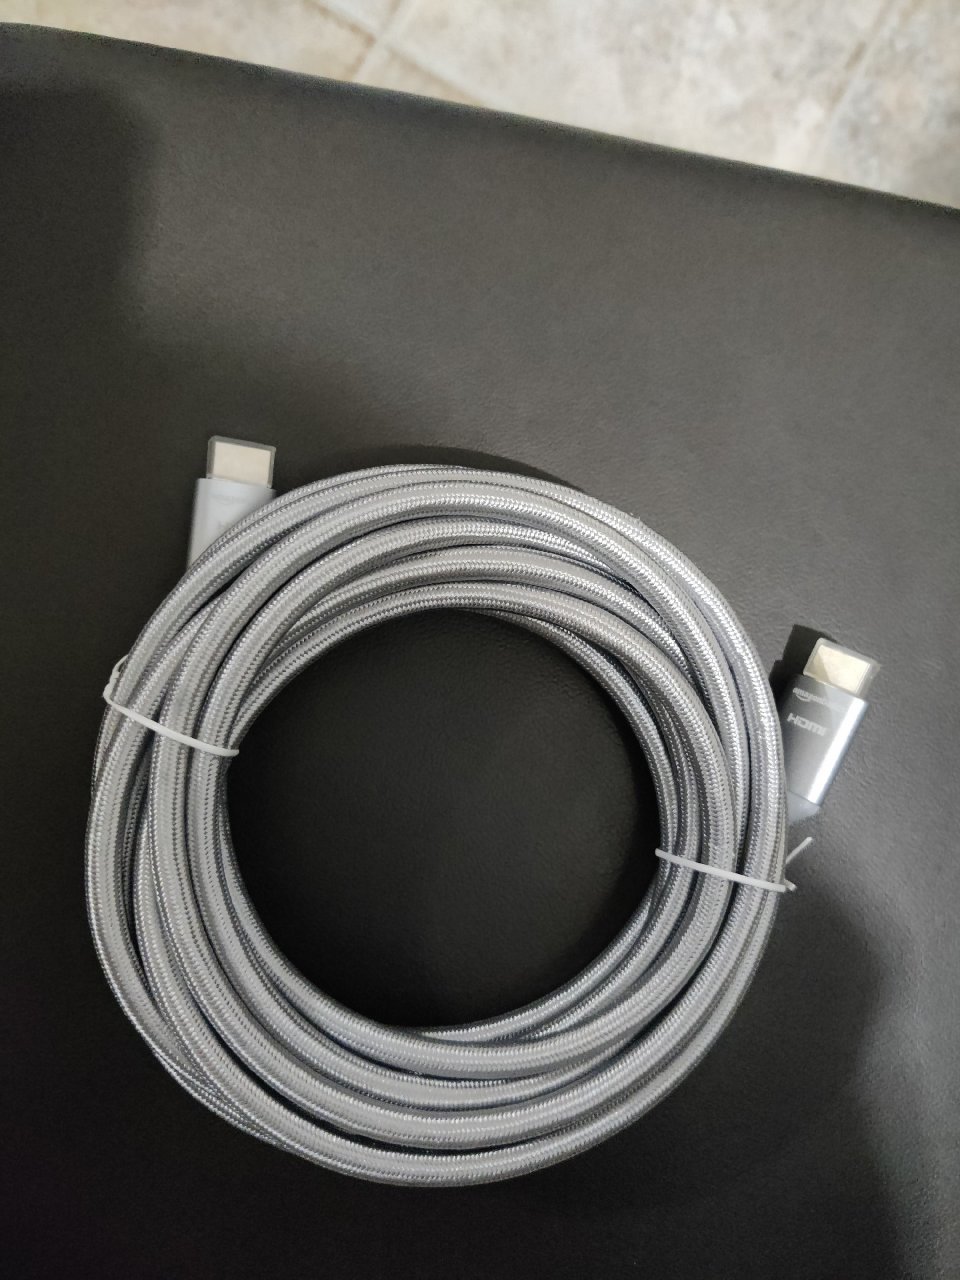 HDMI cable 线